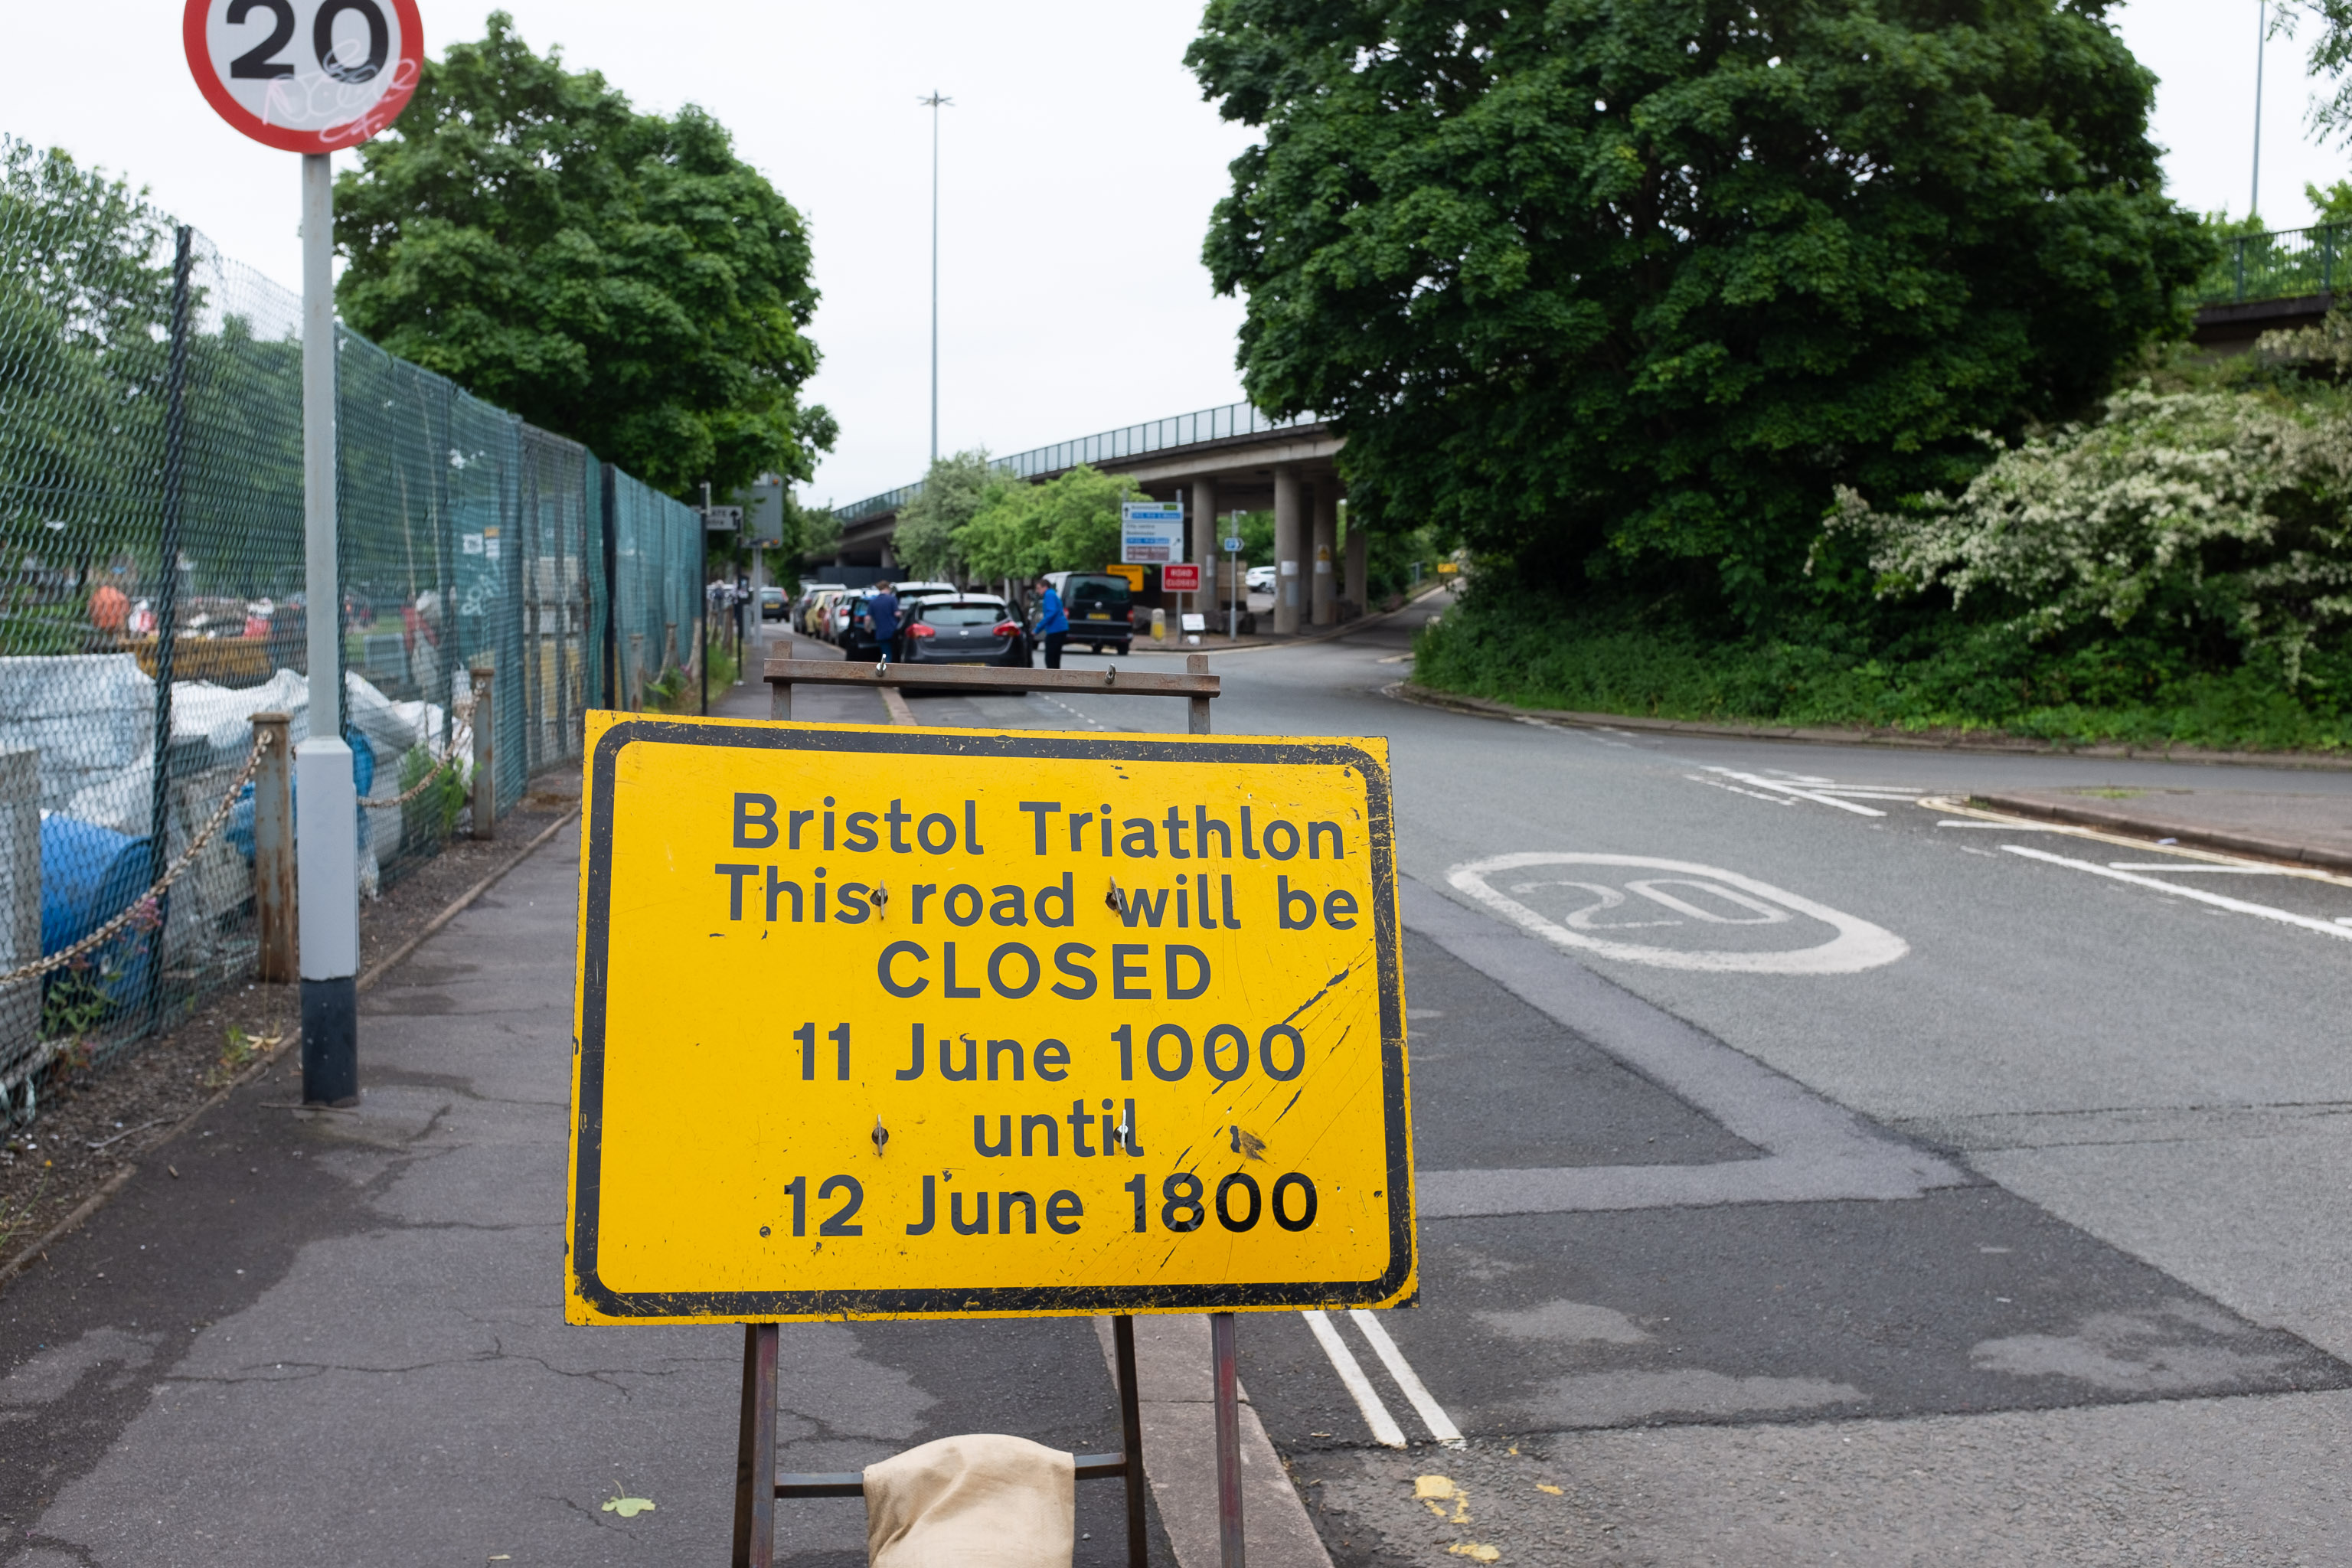 Triathlon
Ah, so it's the triathlon next weekend, then. The swimming bit is done in the Cumberland Basin, so I expect they'll be draining it and re-filling i...